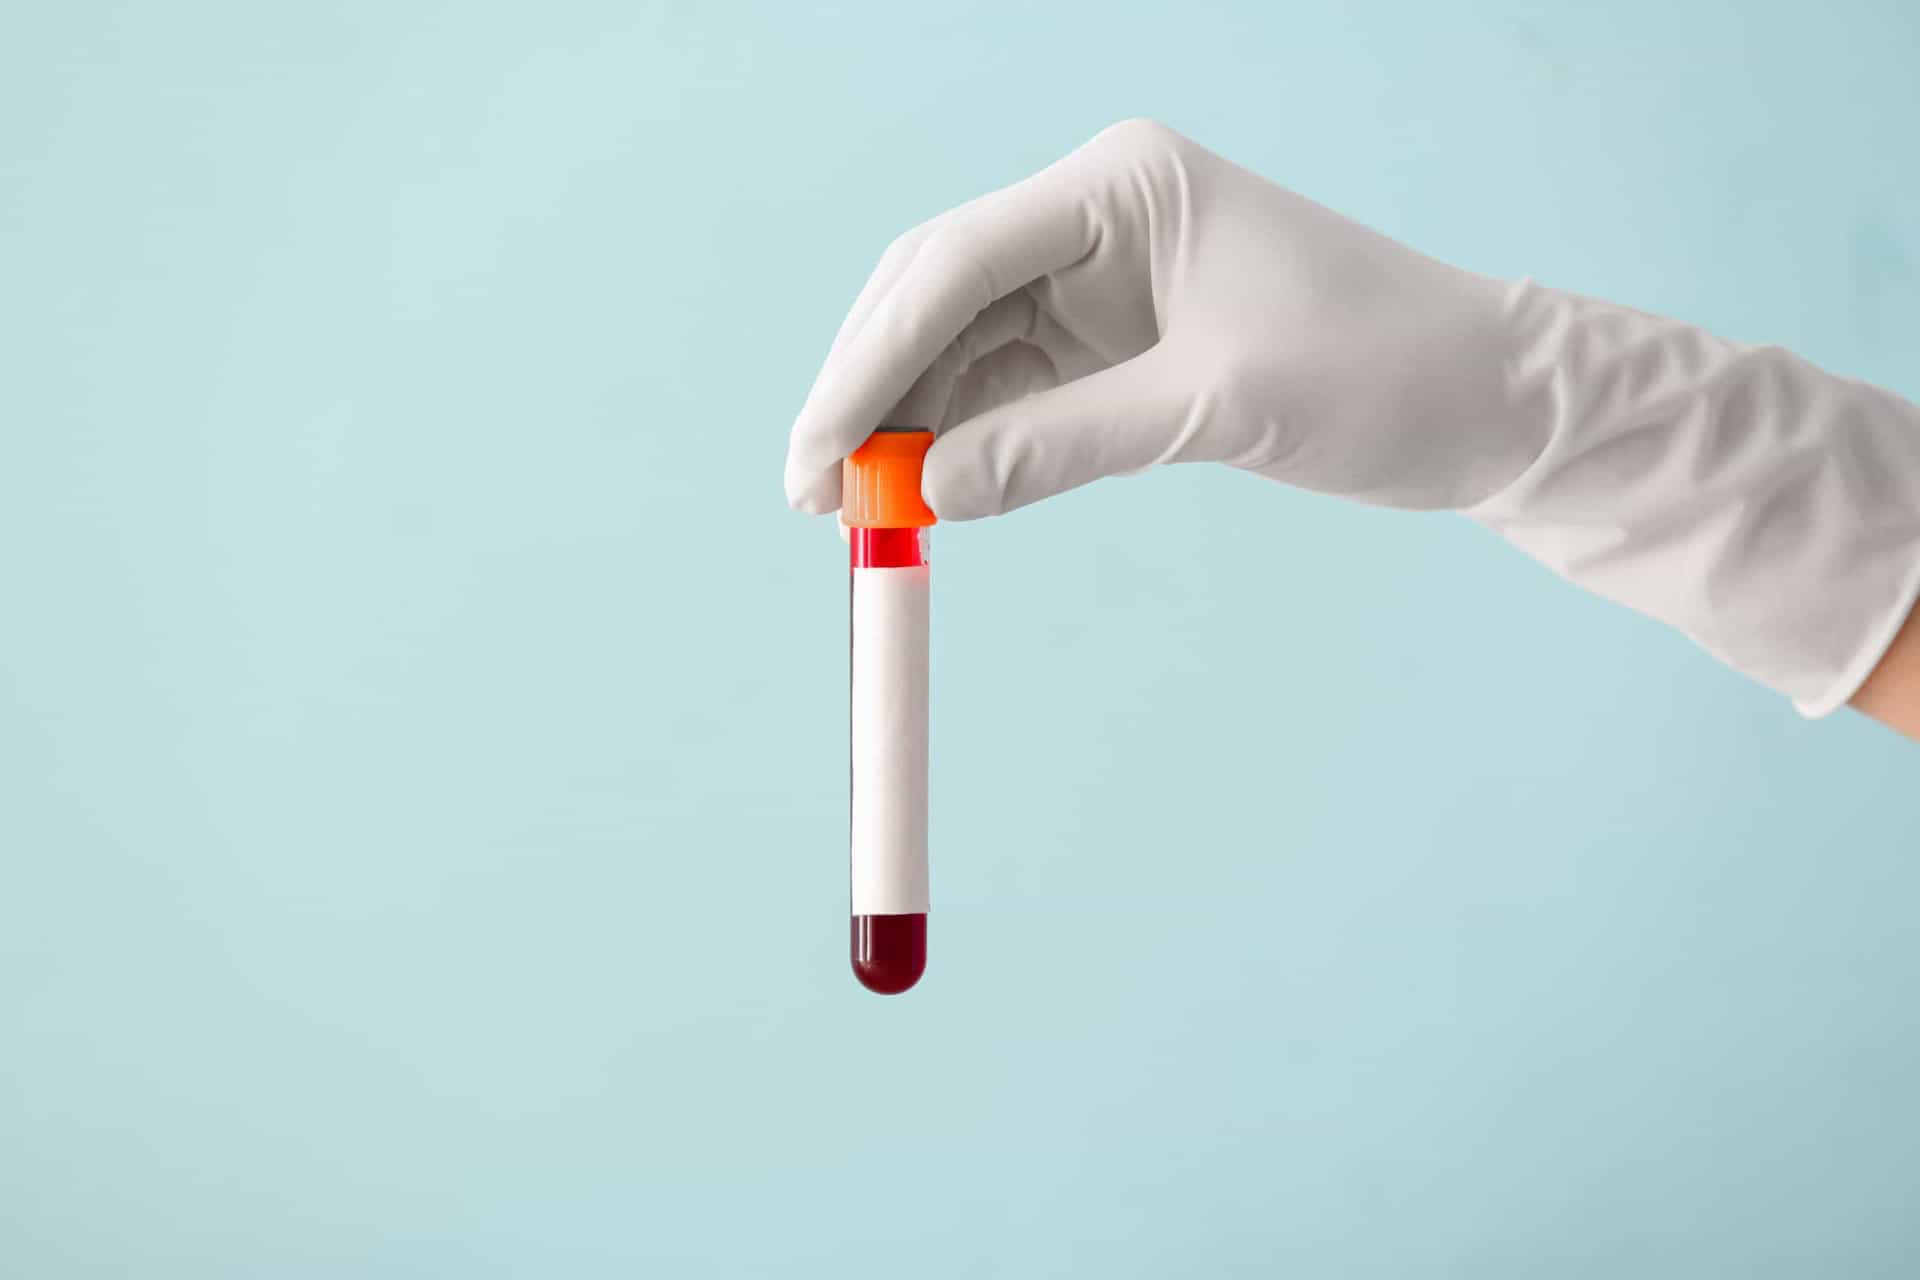 <p>Researchers still don’t understand how blood type and certain diseases are related. It’s thought that genetics and environmental factors both play a role in the development of many conditions. But more research is needed to fully understand this link.</p><p>Sources: (<a href="https://www.medicalnewstoday.com/articles/218285#takeaway" rel="noopener">Medical News Today</a>) (<a href="https://www.webmd.com/a-to-z-guides/ss/slideshow-how-your-blood-type-affects-your-health" rel="noopener">WebMD</a>) (<a href="https://www.healthline.com/health/blood-type-and-autoimmune-diseases#bottom-line" rel="noopener">Healthline</a>)</p><p>See also: <a href="https://www.starsinsider.com/health/499757/health-mistakes-you-didnt-know-youre-making">Health mistakes you didn't know you're making</a></p> <p><a href="https://www.msn.com/en-us/community/channel/vid-7xx8mnucu55yw63we9va2gwr7uihbxwc68fxqp25x6tg4ftibpra?cvid=94631541bc0f4f89bfd59158d696ad7e">Follow us and access great exclusive content everyday</a></p>